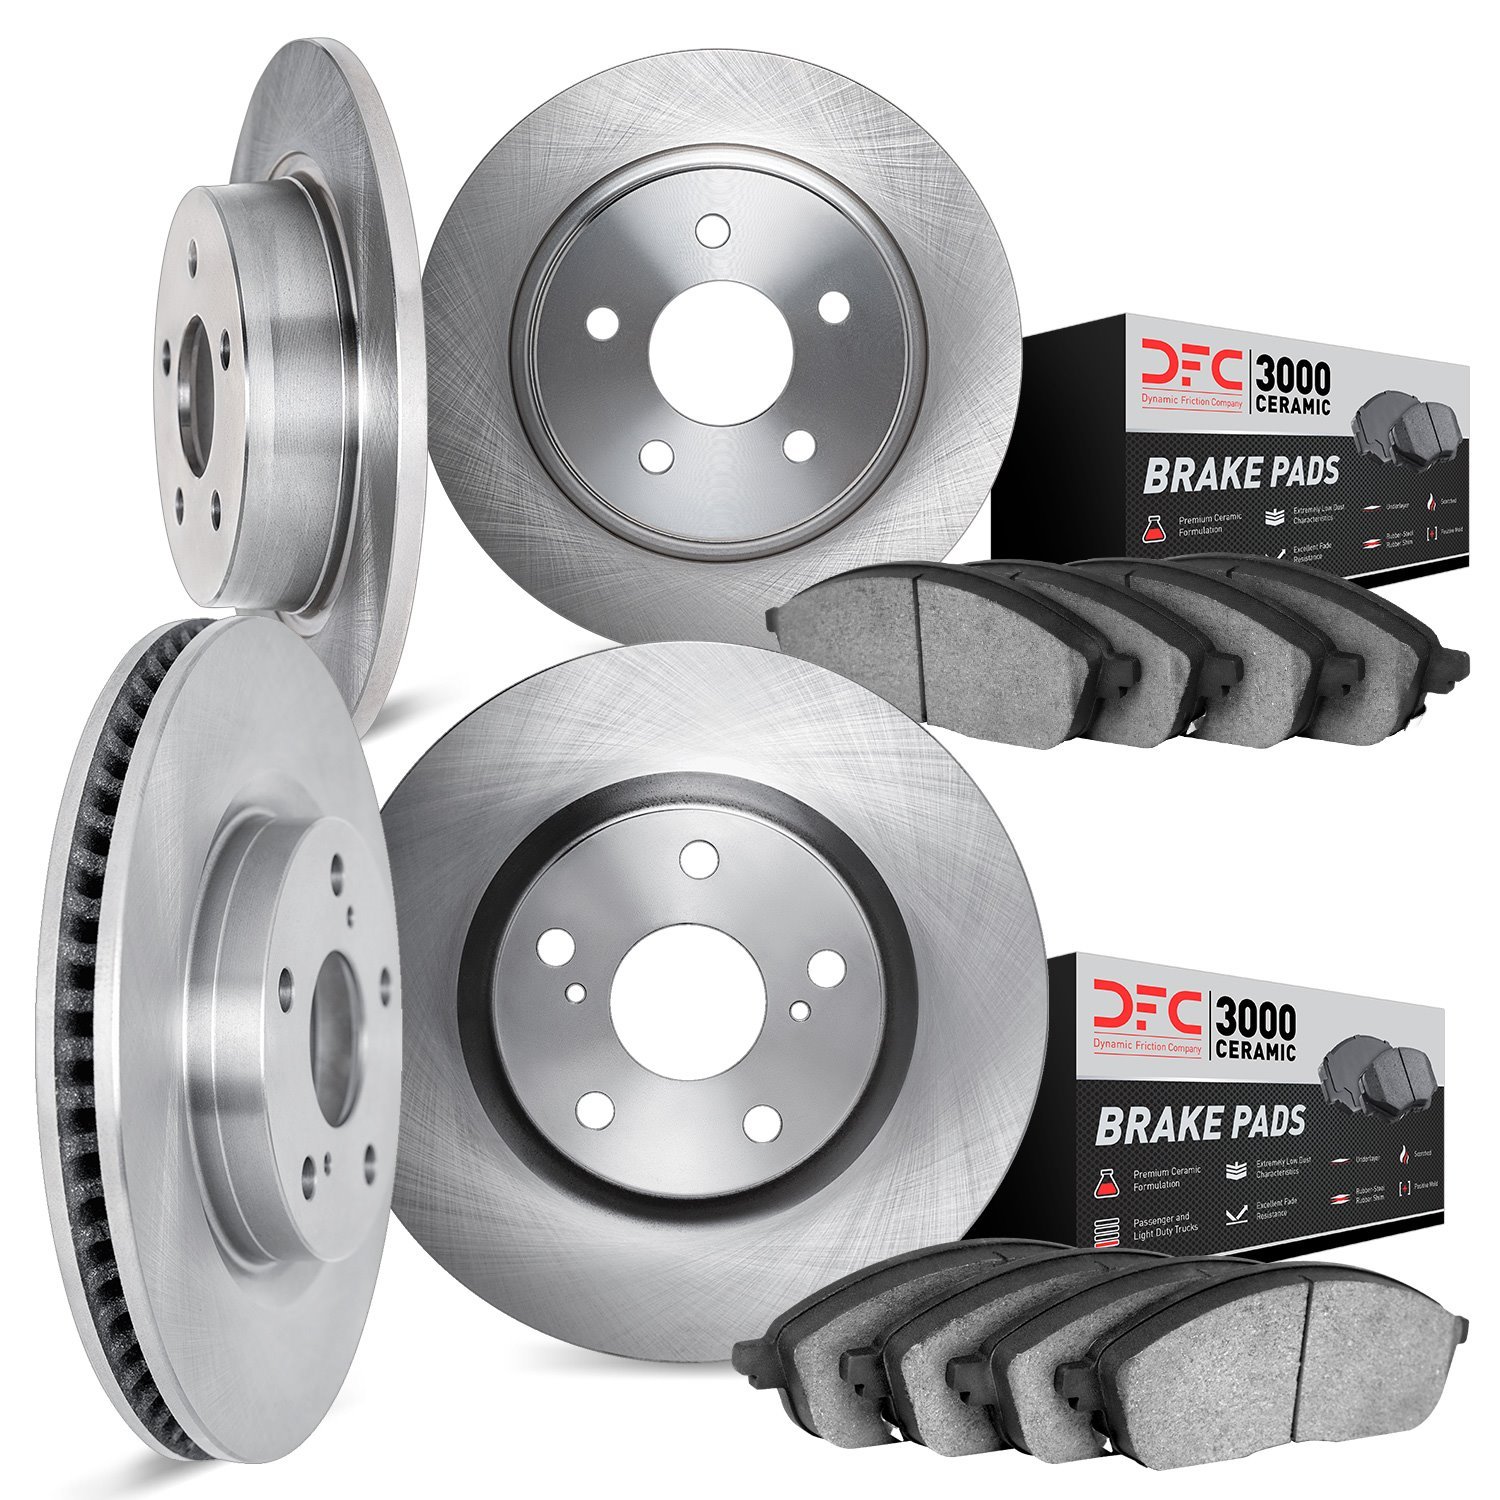 6304-20005 Brake Rotors with 3000-Series Ceramic Brake Pads Kit, 2001-2004 Multiple Makes/Models, Position: Front and Rear